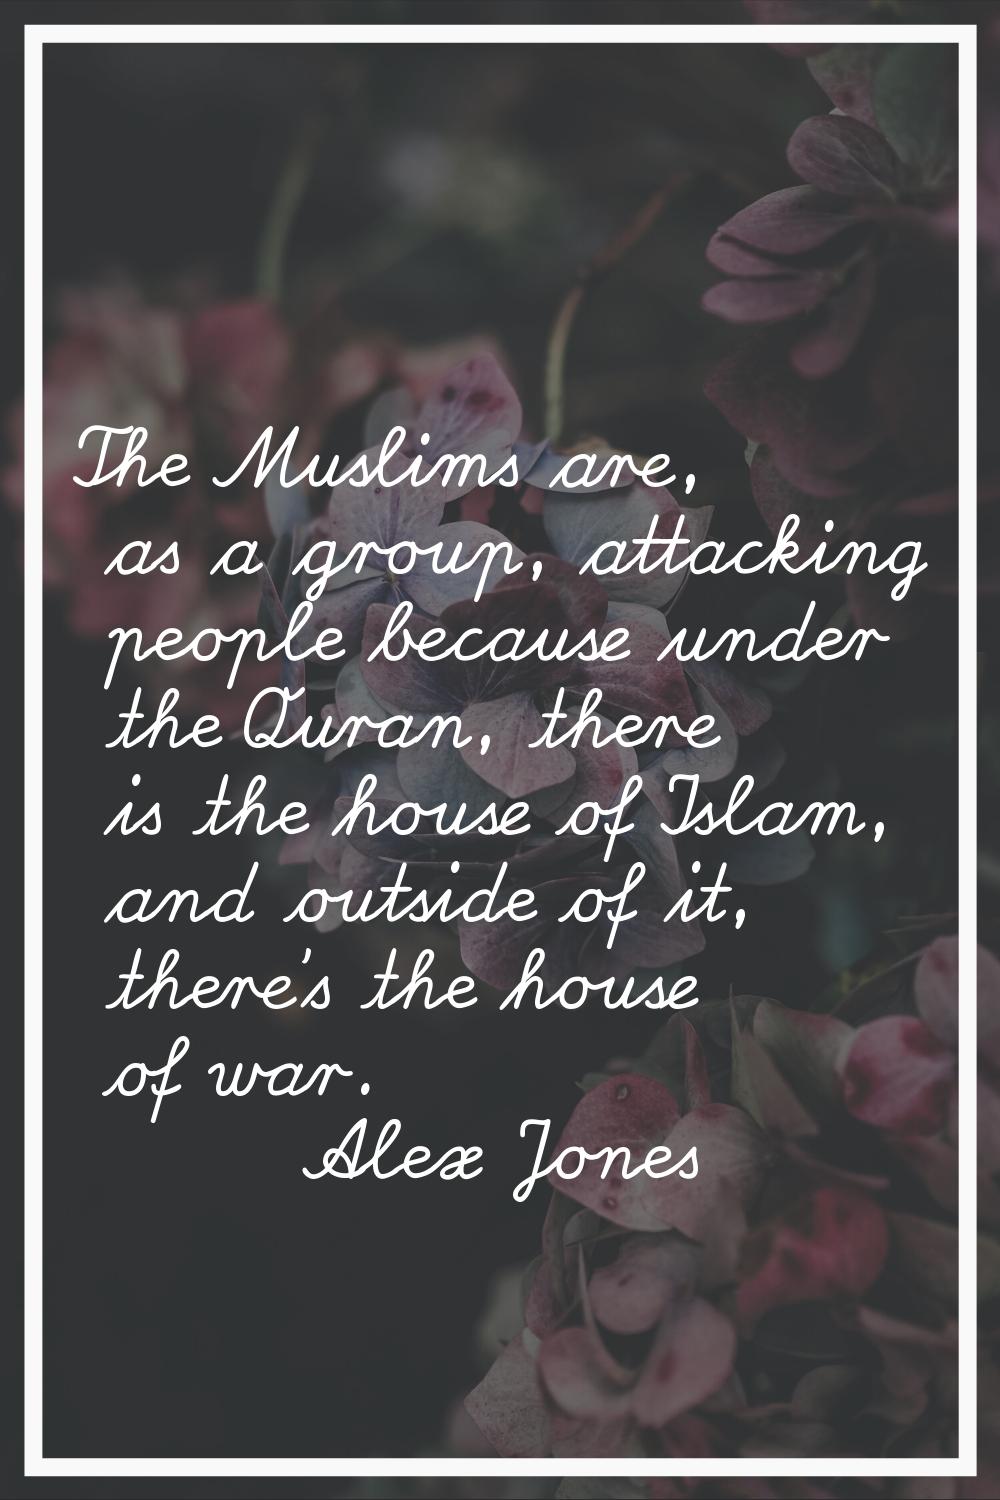 The Muslims are, as a group, attacking people because under the Quran, there is the house of Islam,